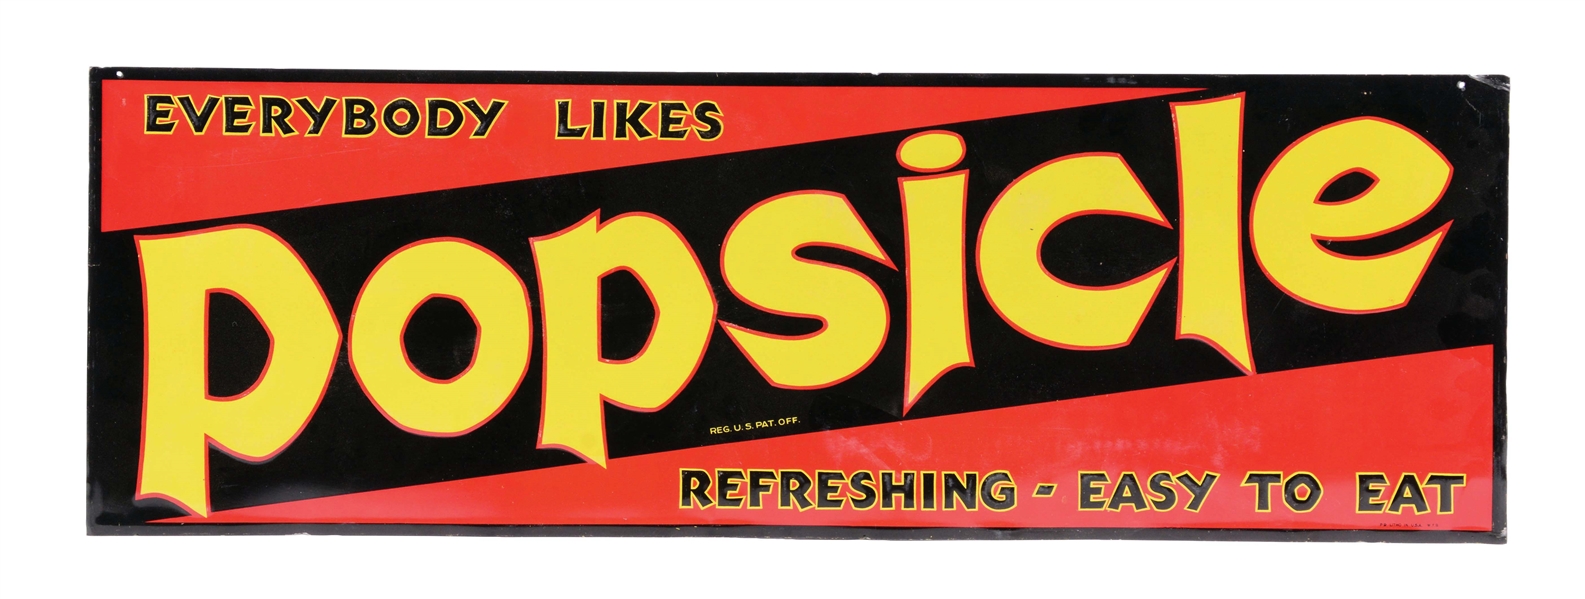 EMBOSSED TIN POPSICLE SIGN.